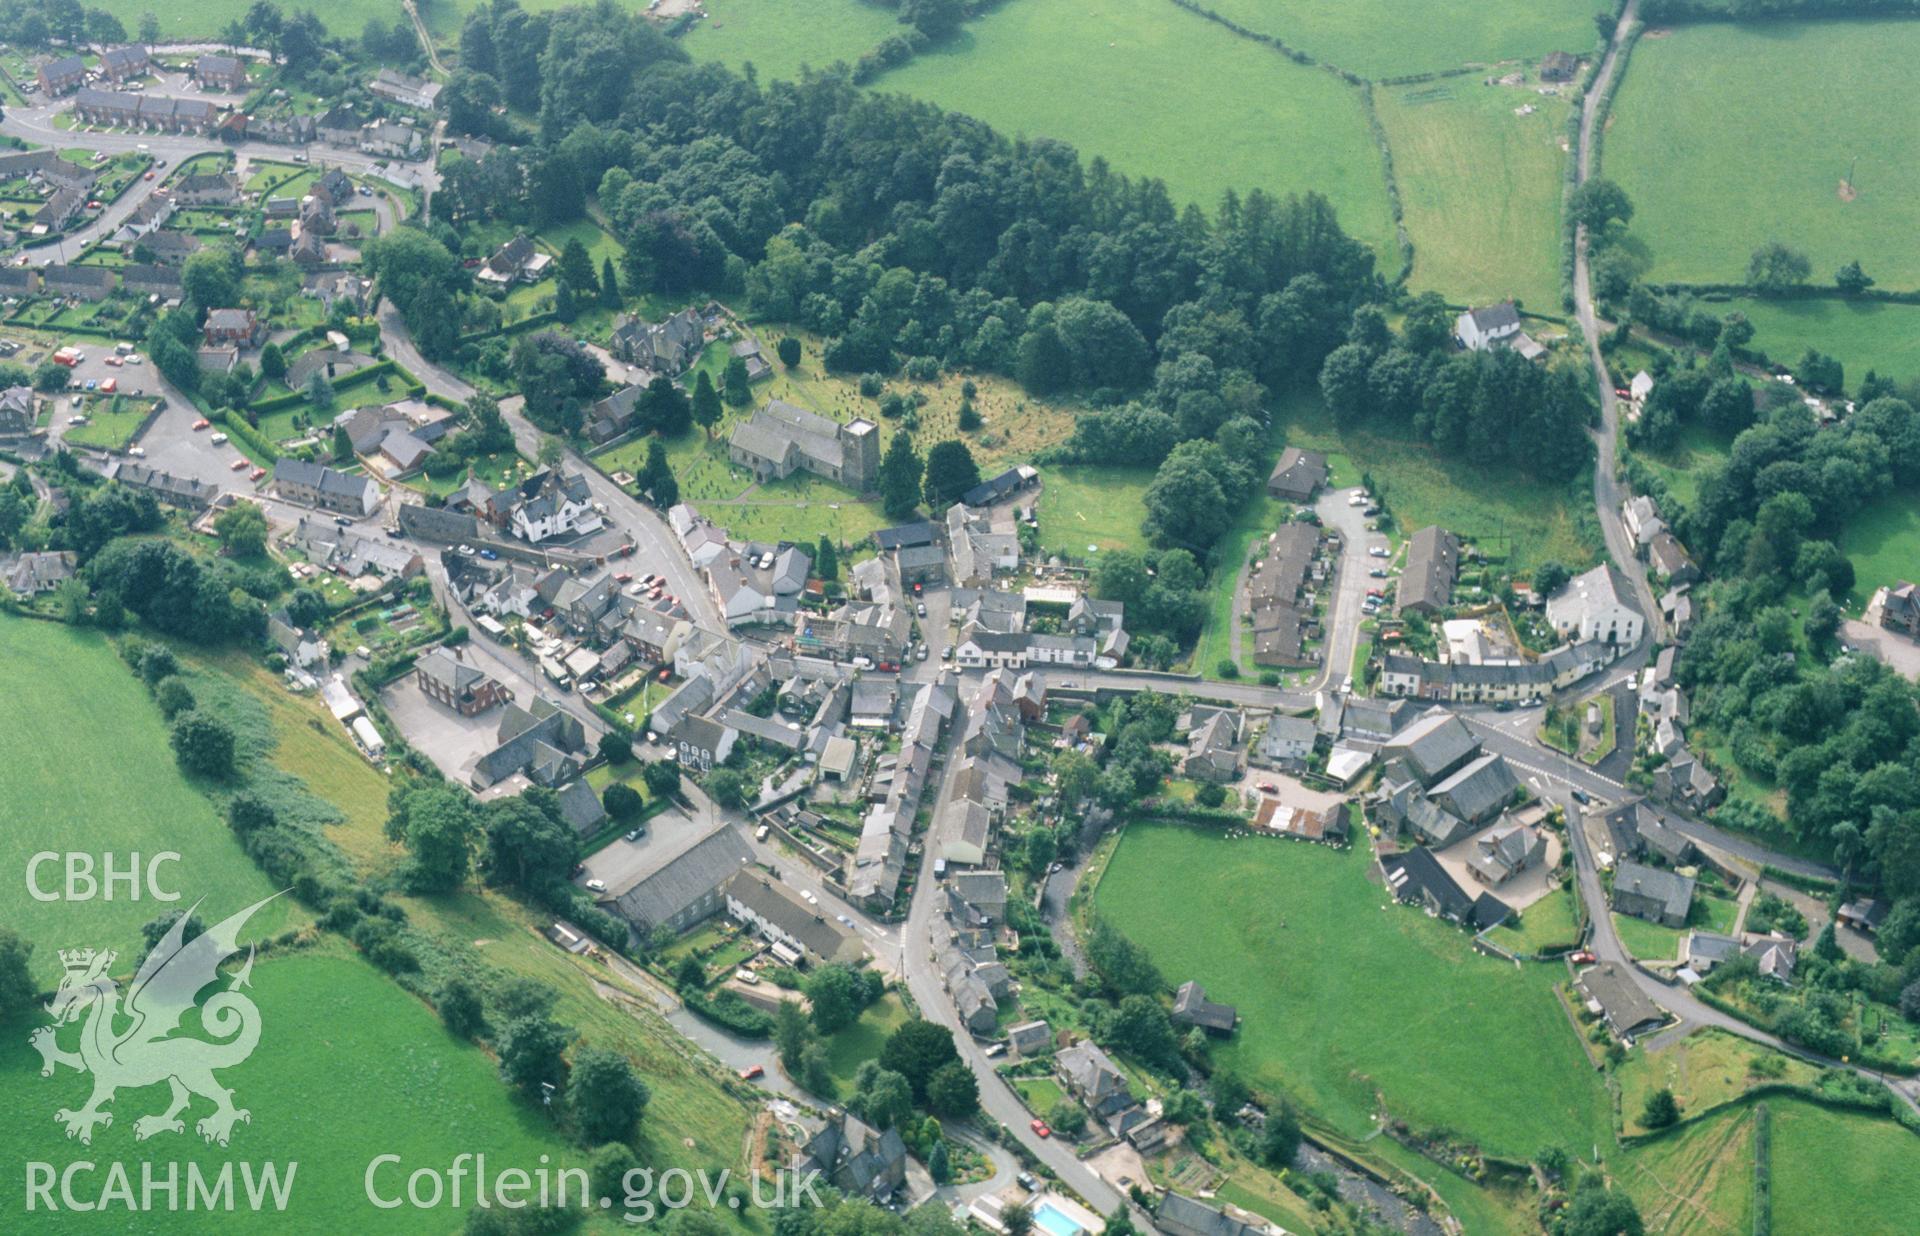 RCAHMW colour oblique aerial photograph of Llanrhaeadr Ym Mochnant taken on 12/08/2003 by Toby Driver